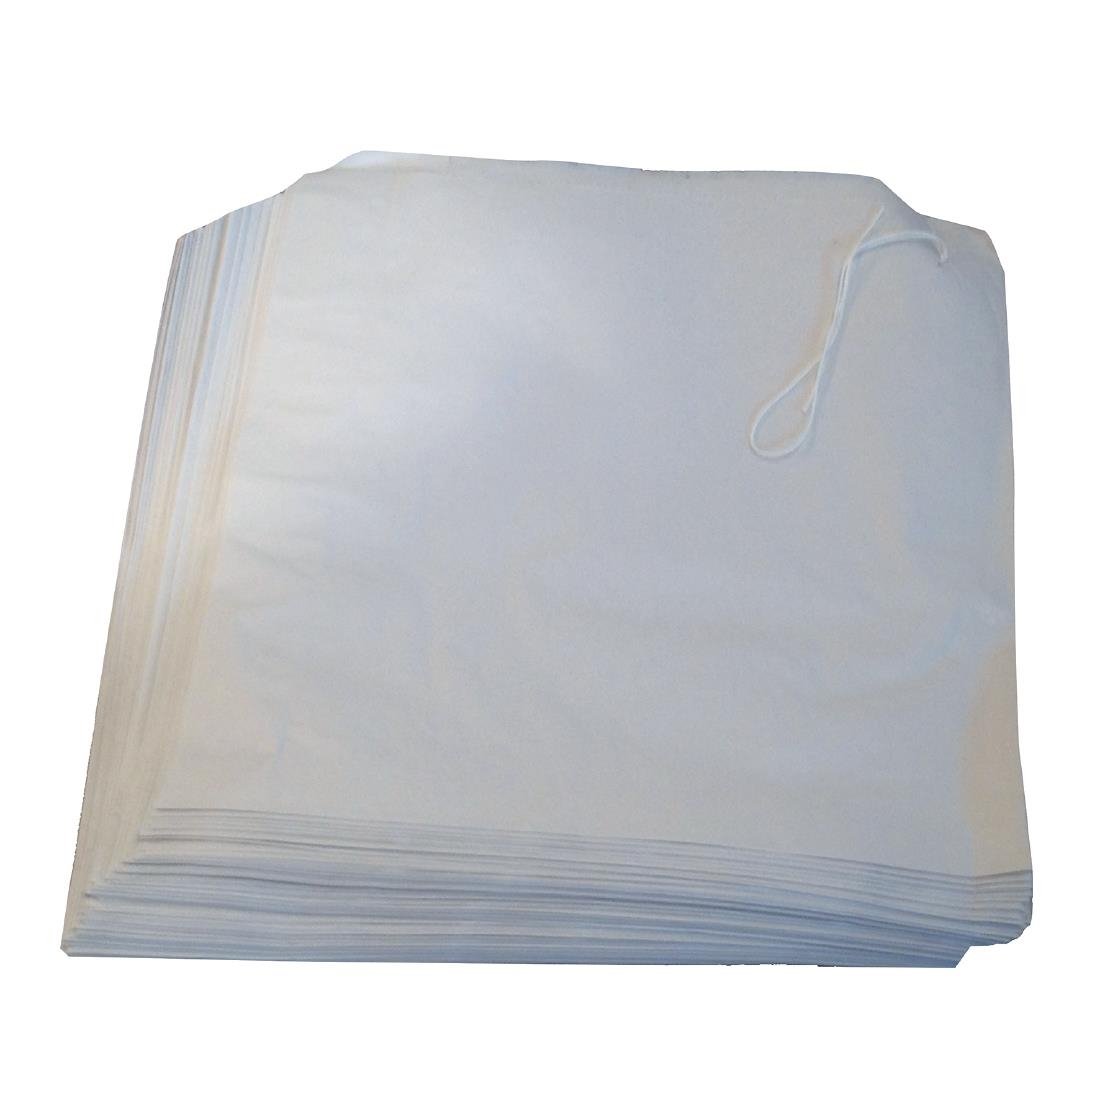 Bakery Greengrocers White Sulphite Bags 8.5x8.5" 1000 Paper Strung Bags 